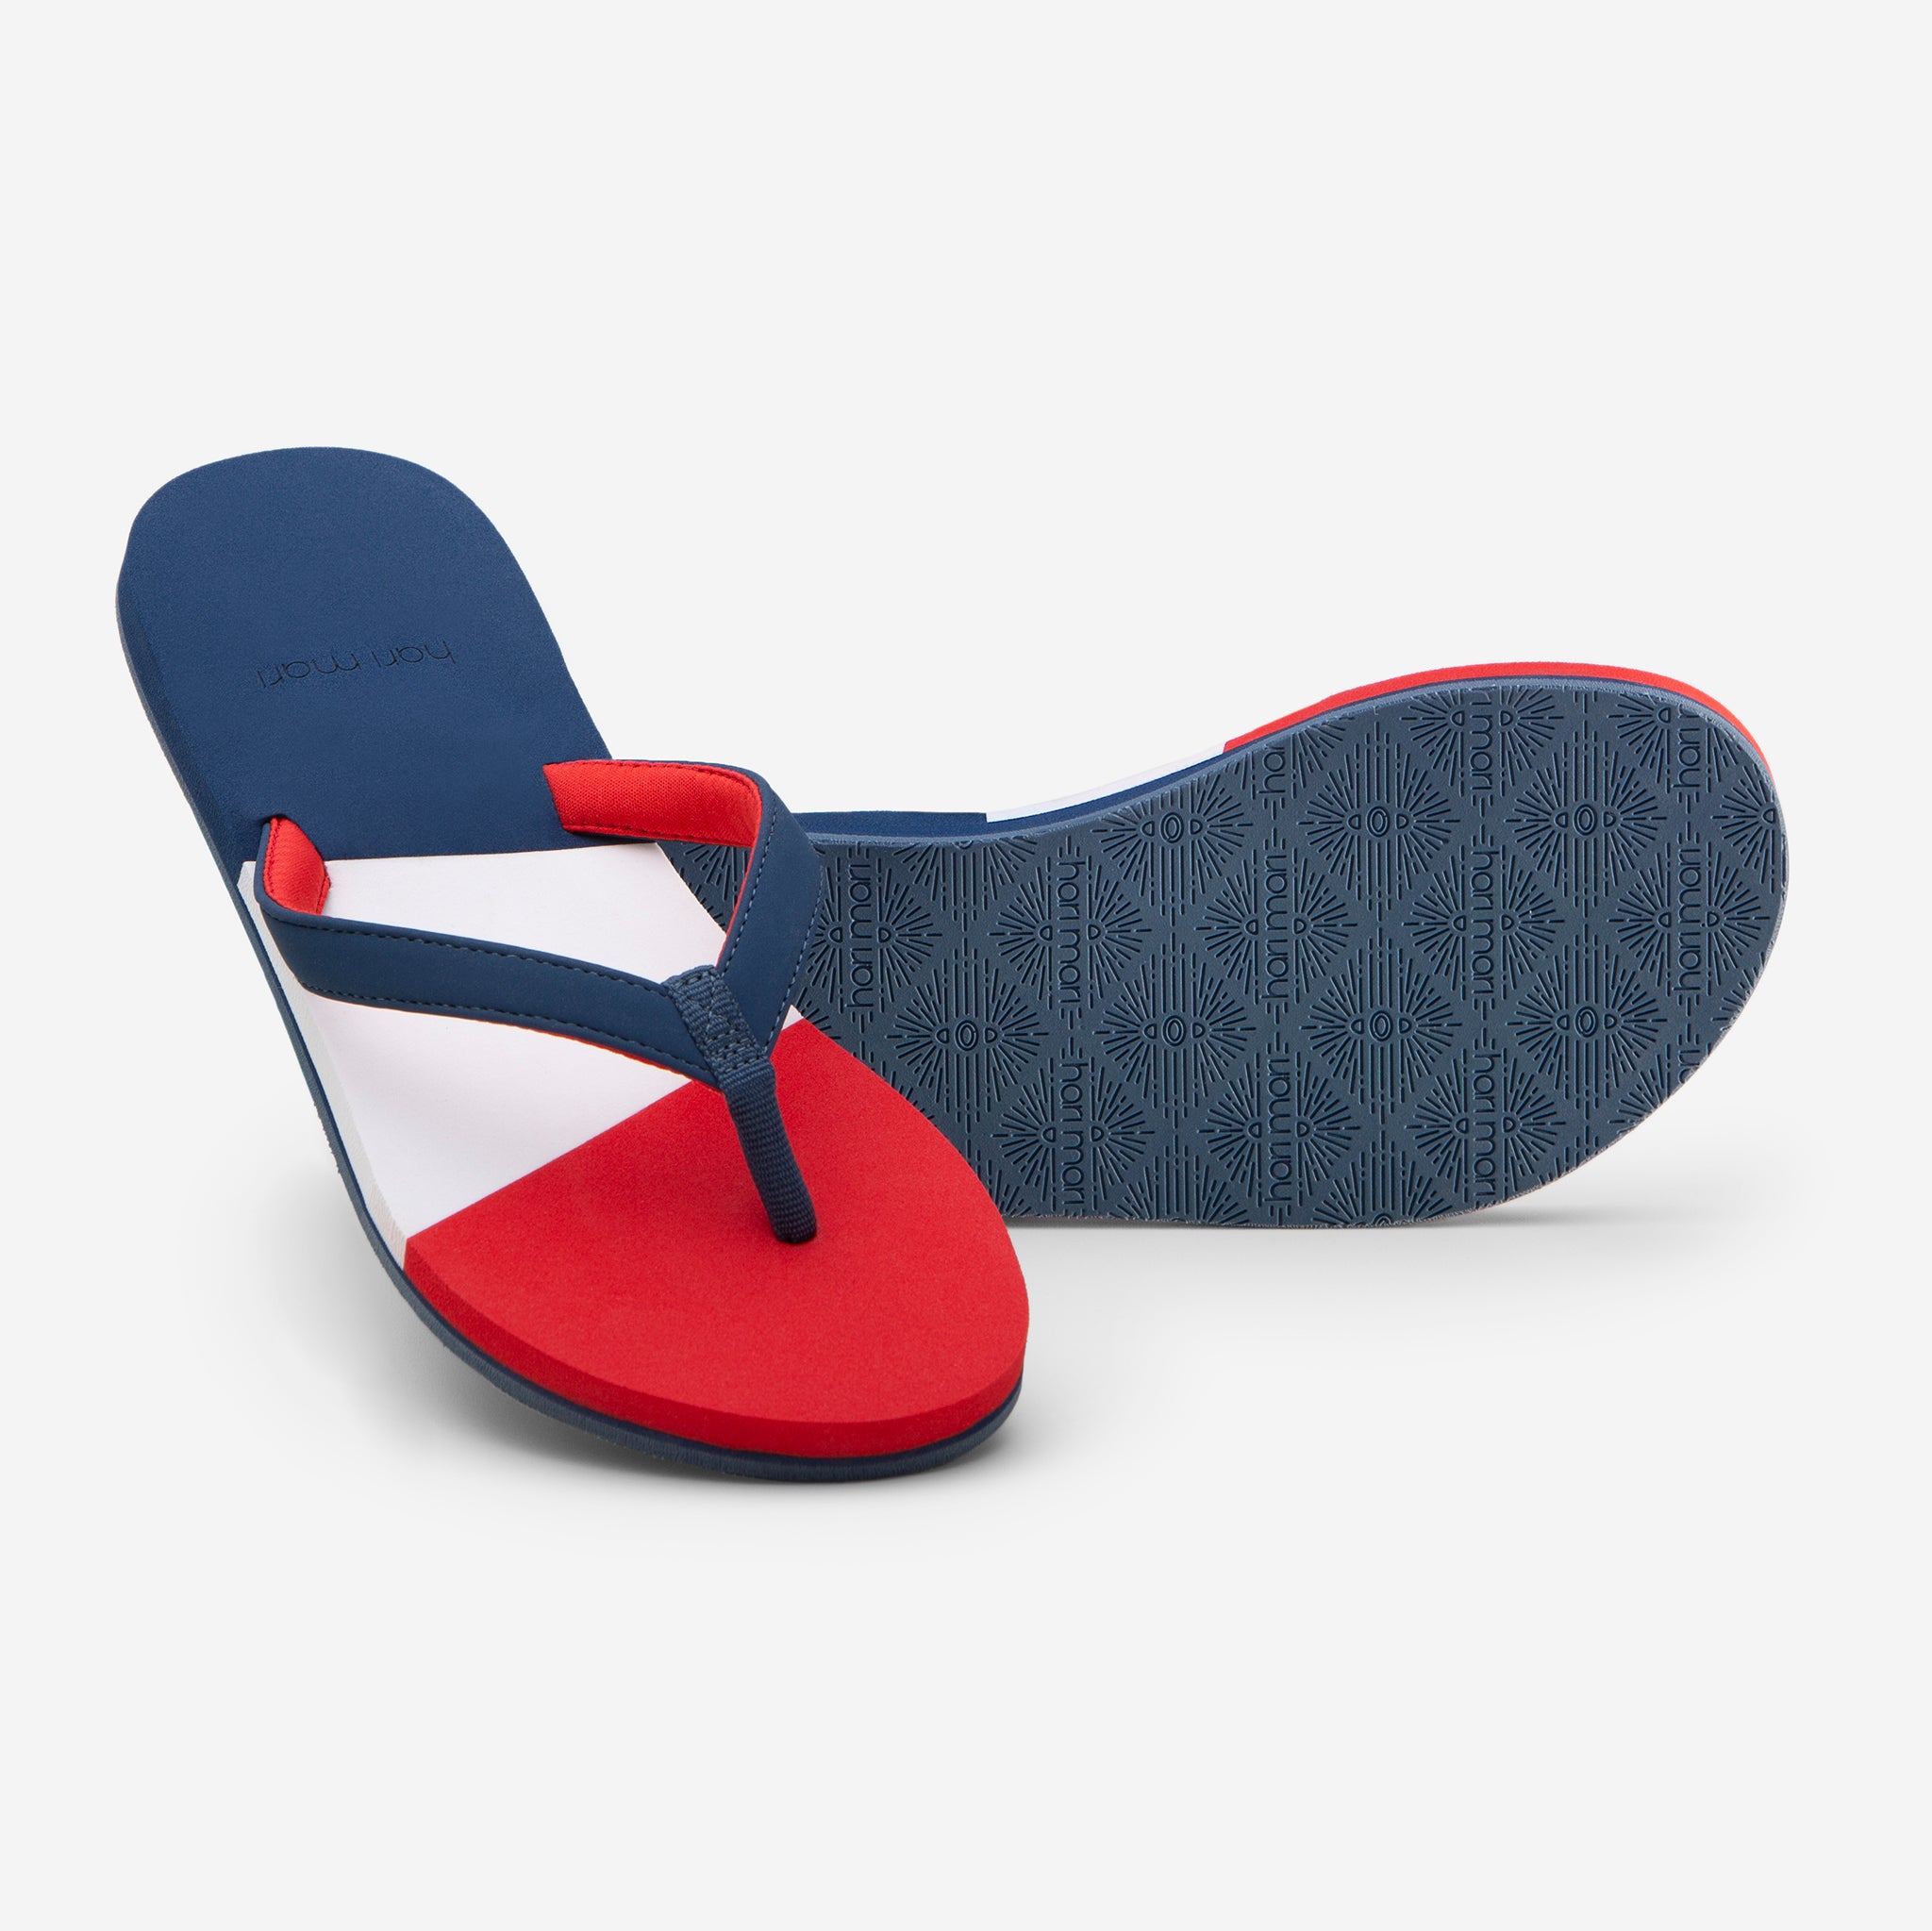 Hari Mari Women's Meadows Asana Flip Flops in Navy/Red/Lily on white background showing flip flop and bottom of flip flop rubber outsole